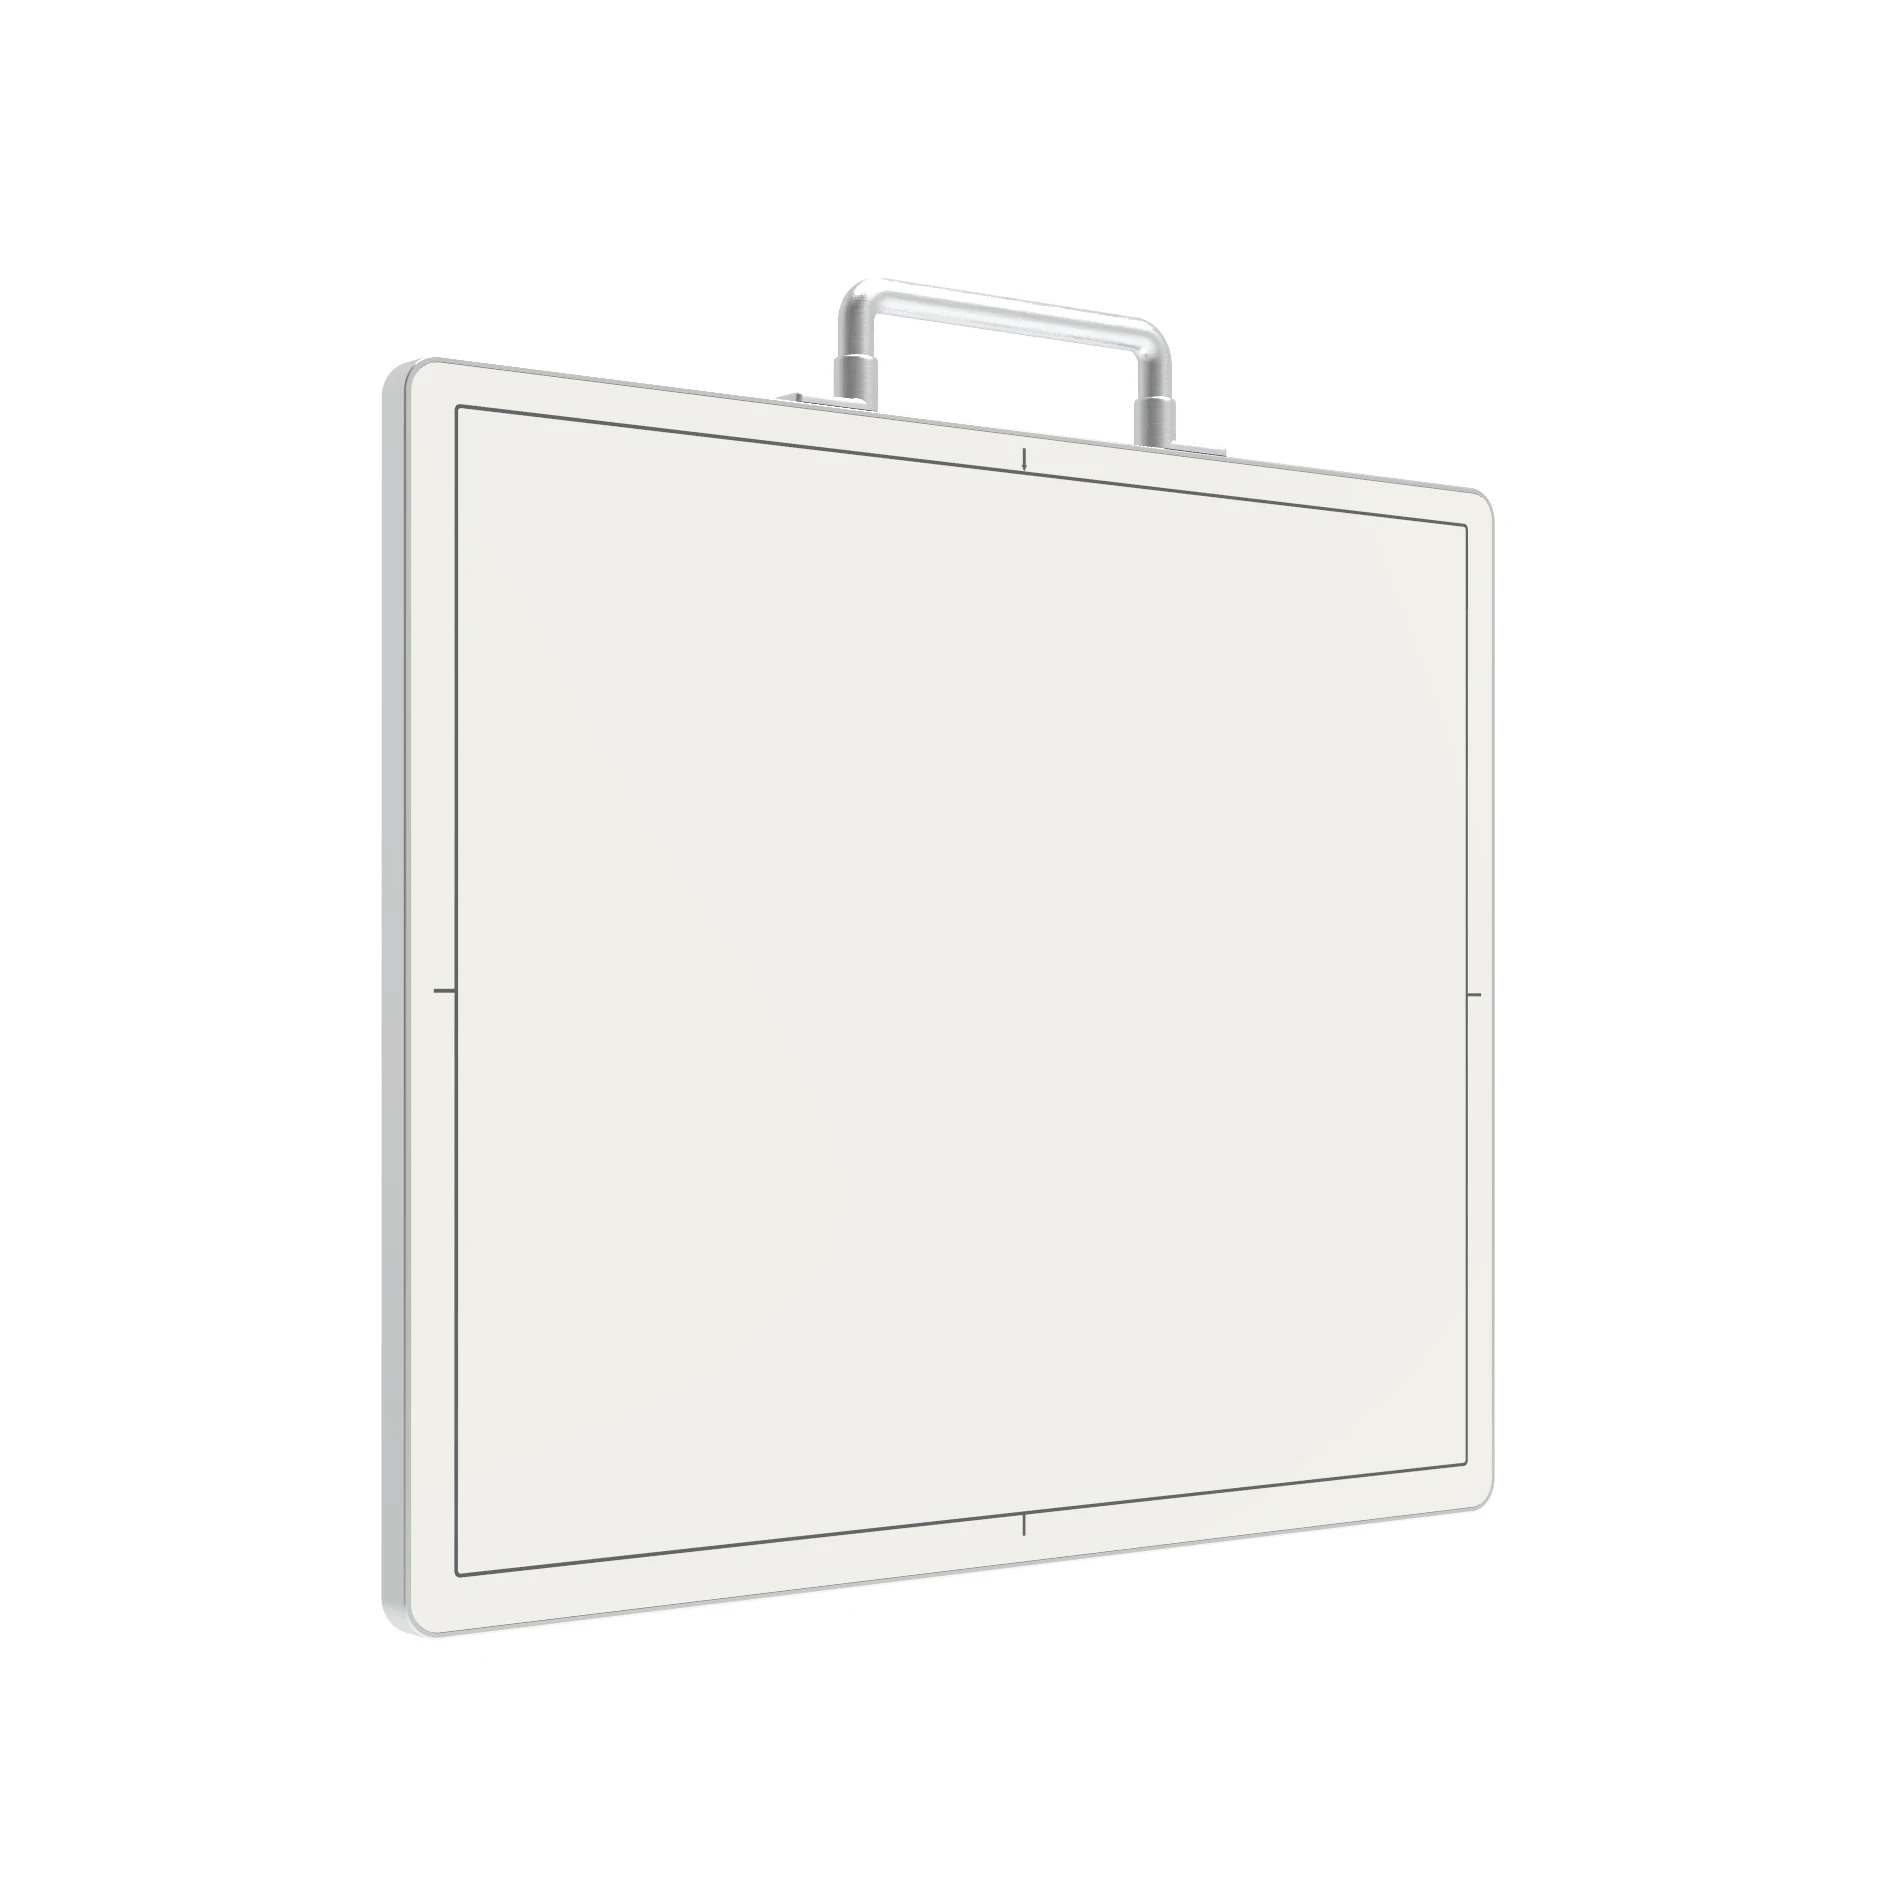 2020 Yueshen YS3543 14x17 inch Cassette-Size DR  Wired Wireless X Ray  Flat Panel Detector